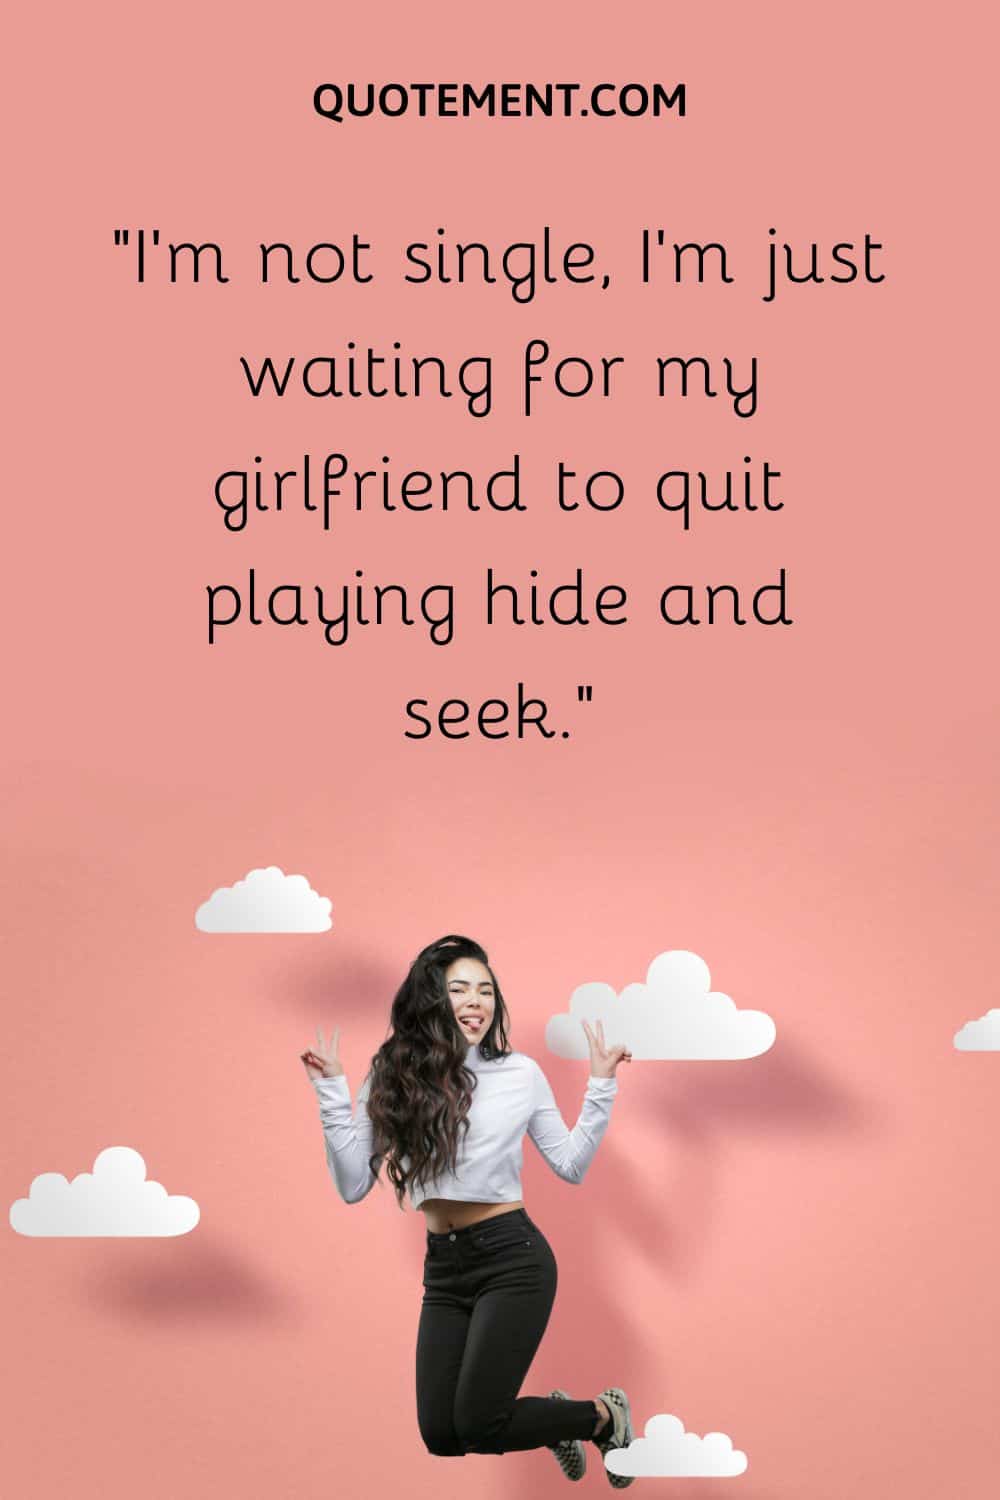 I’m not single, I’m just waiting for my girlfriend to quit playing hide and seek